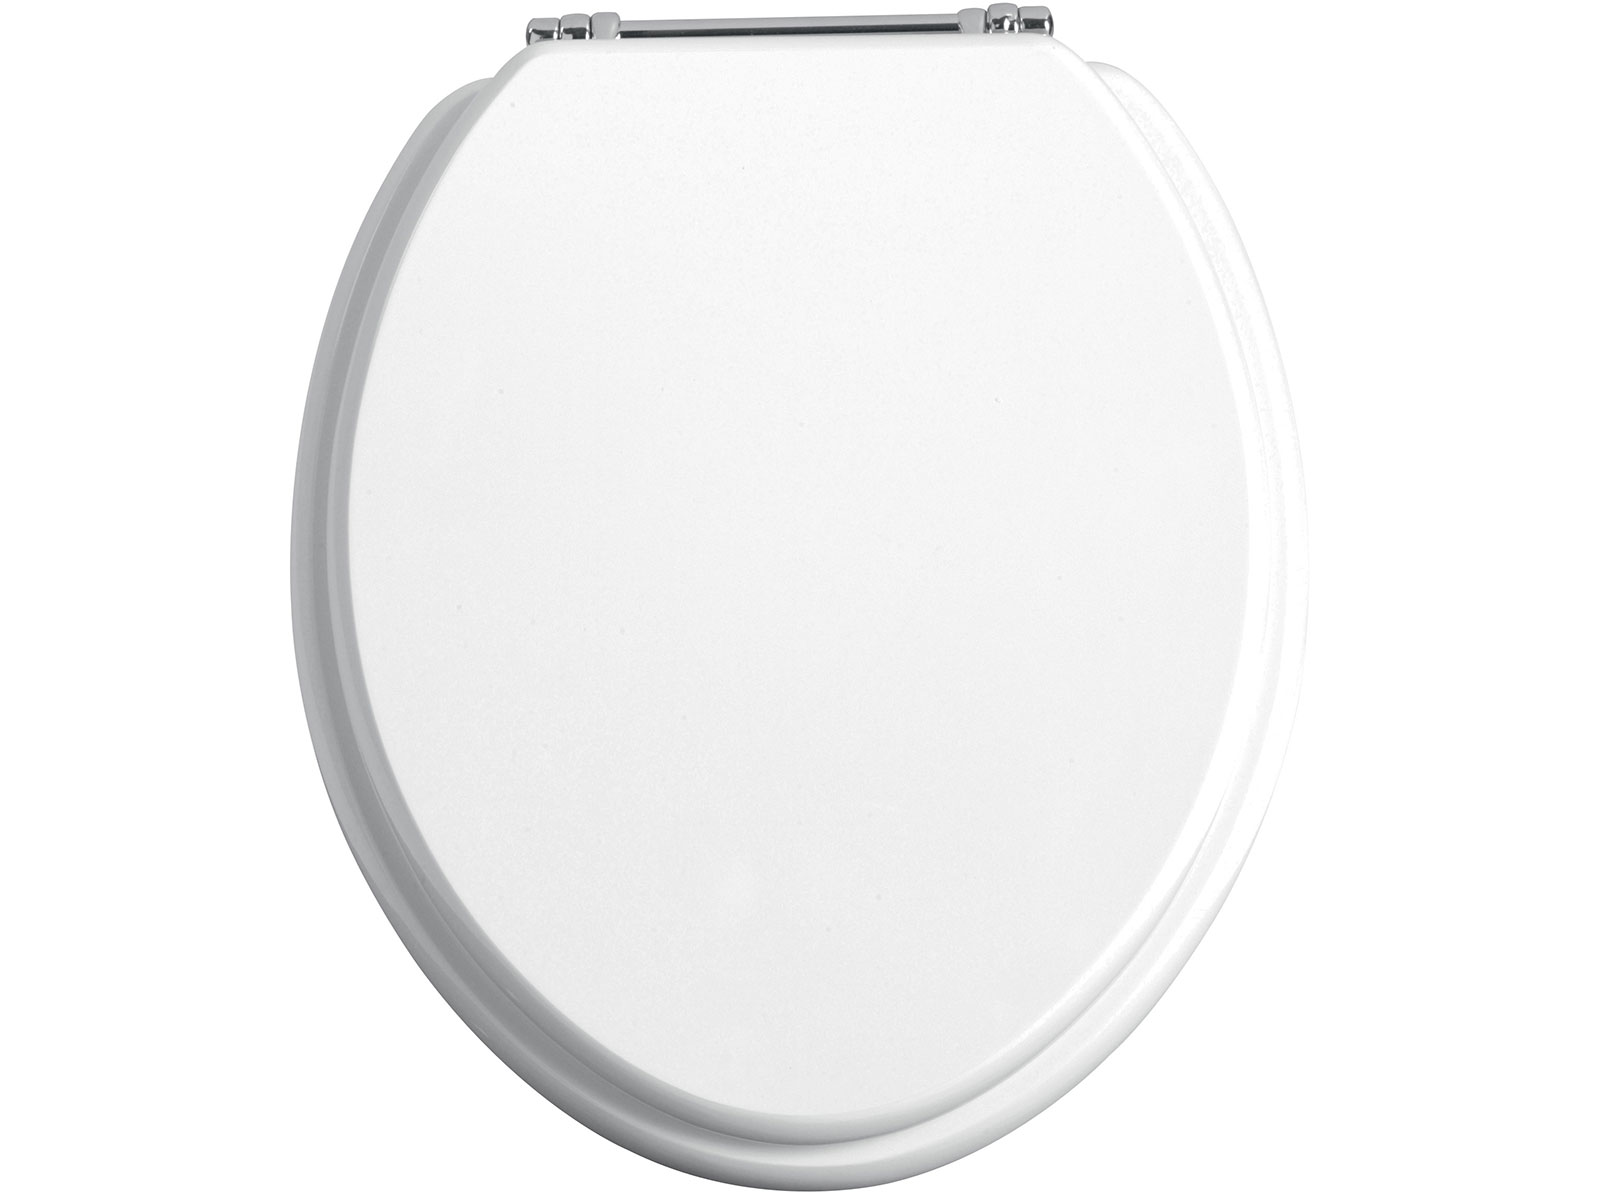 Heritage Soft Close WC Seat with Chrome Finish Hinges - White Gloss (6871)